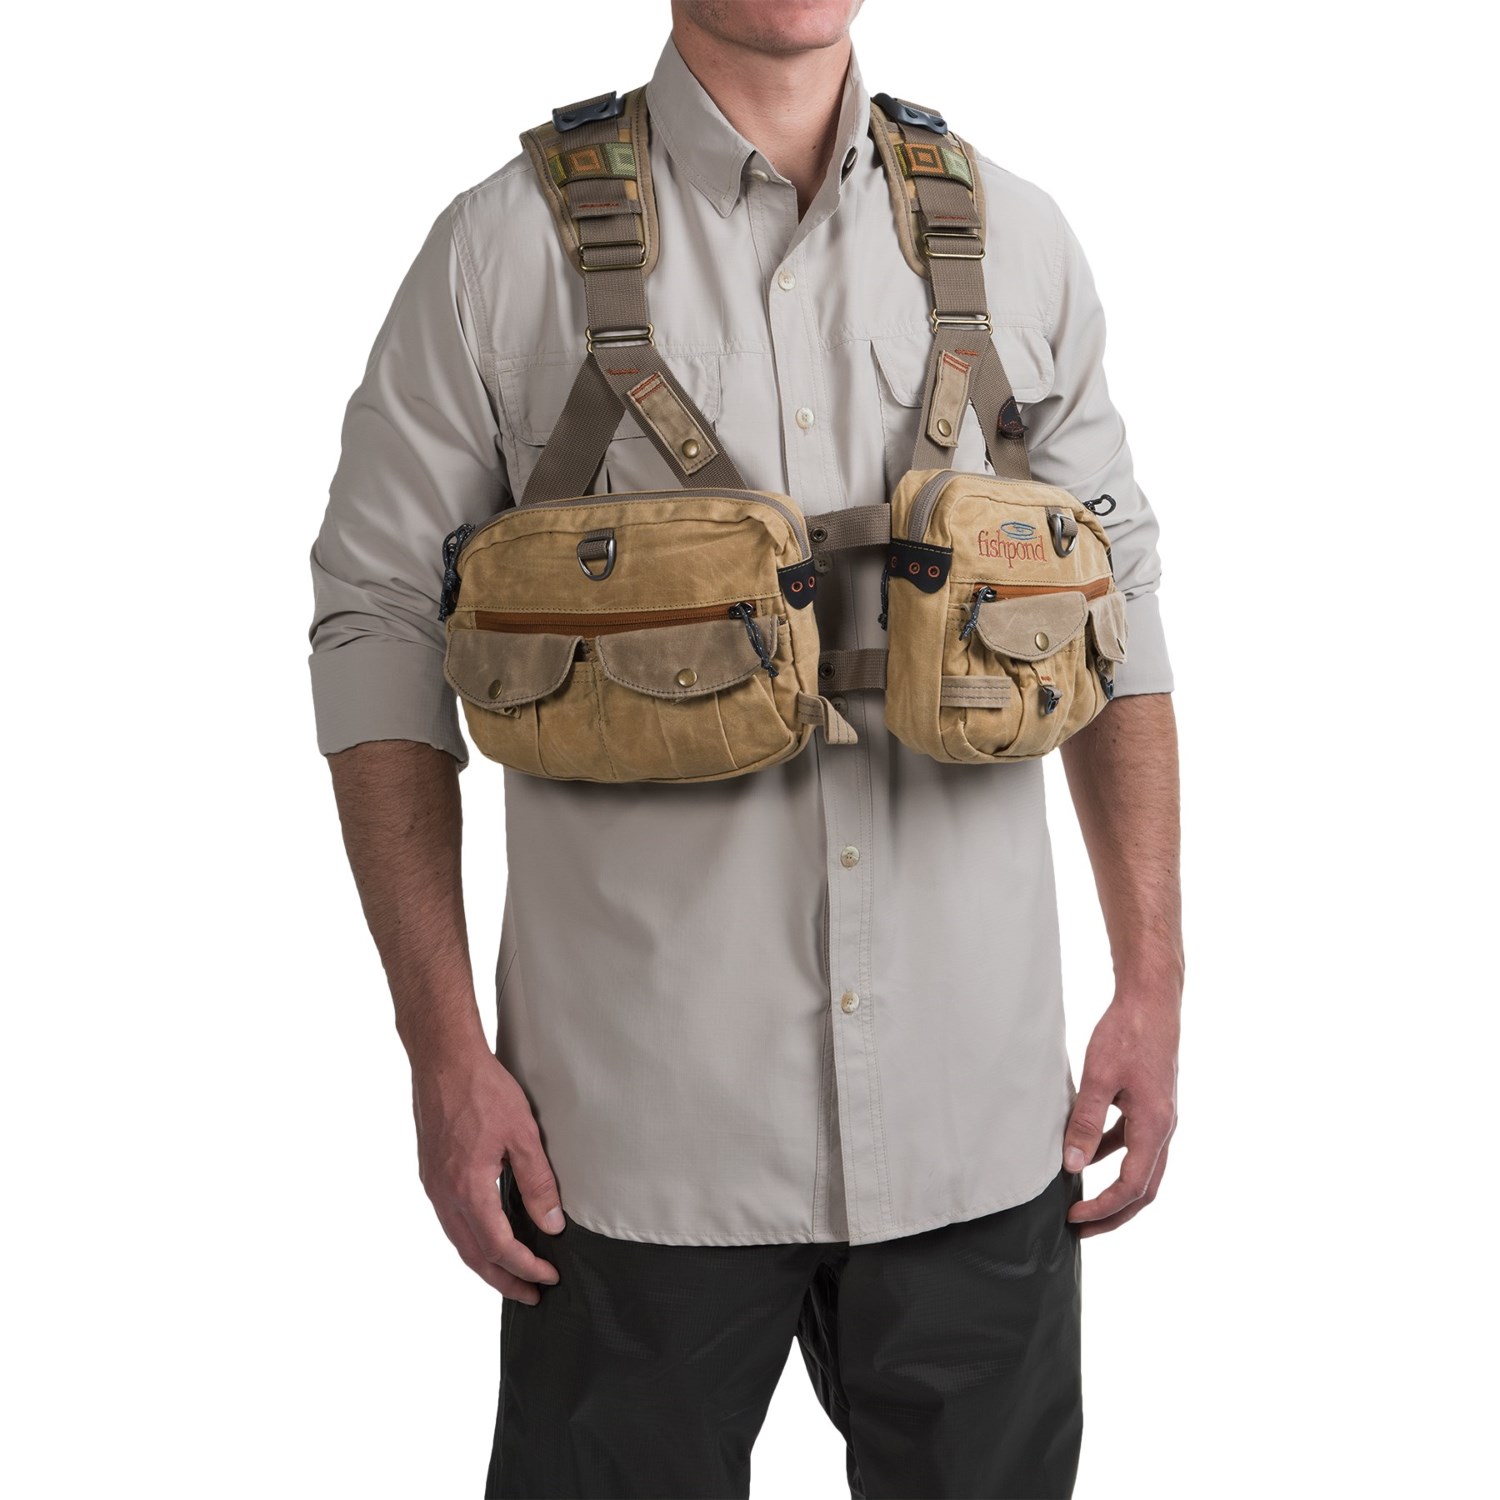 Fishpond Fishpond Vaquero Tech Pack Vest - Waxed Cotton海淘返利